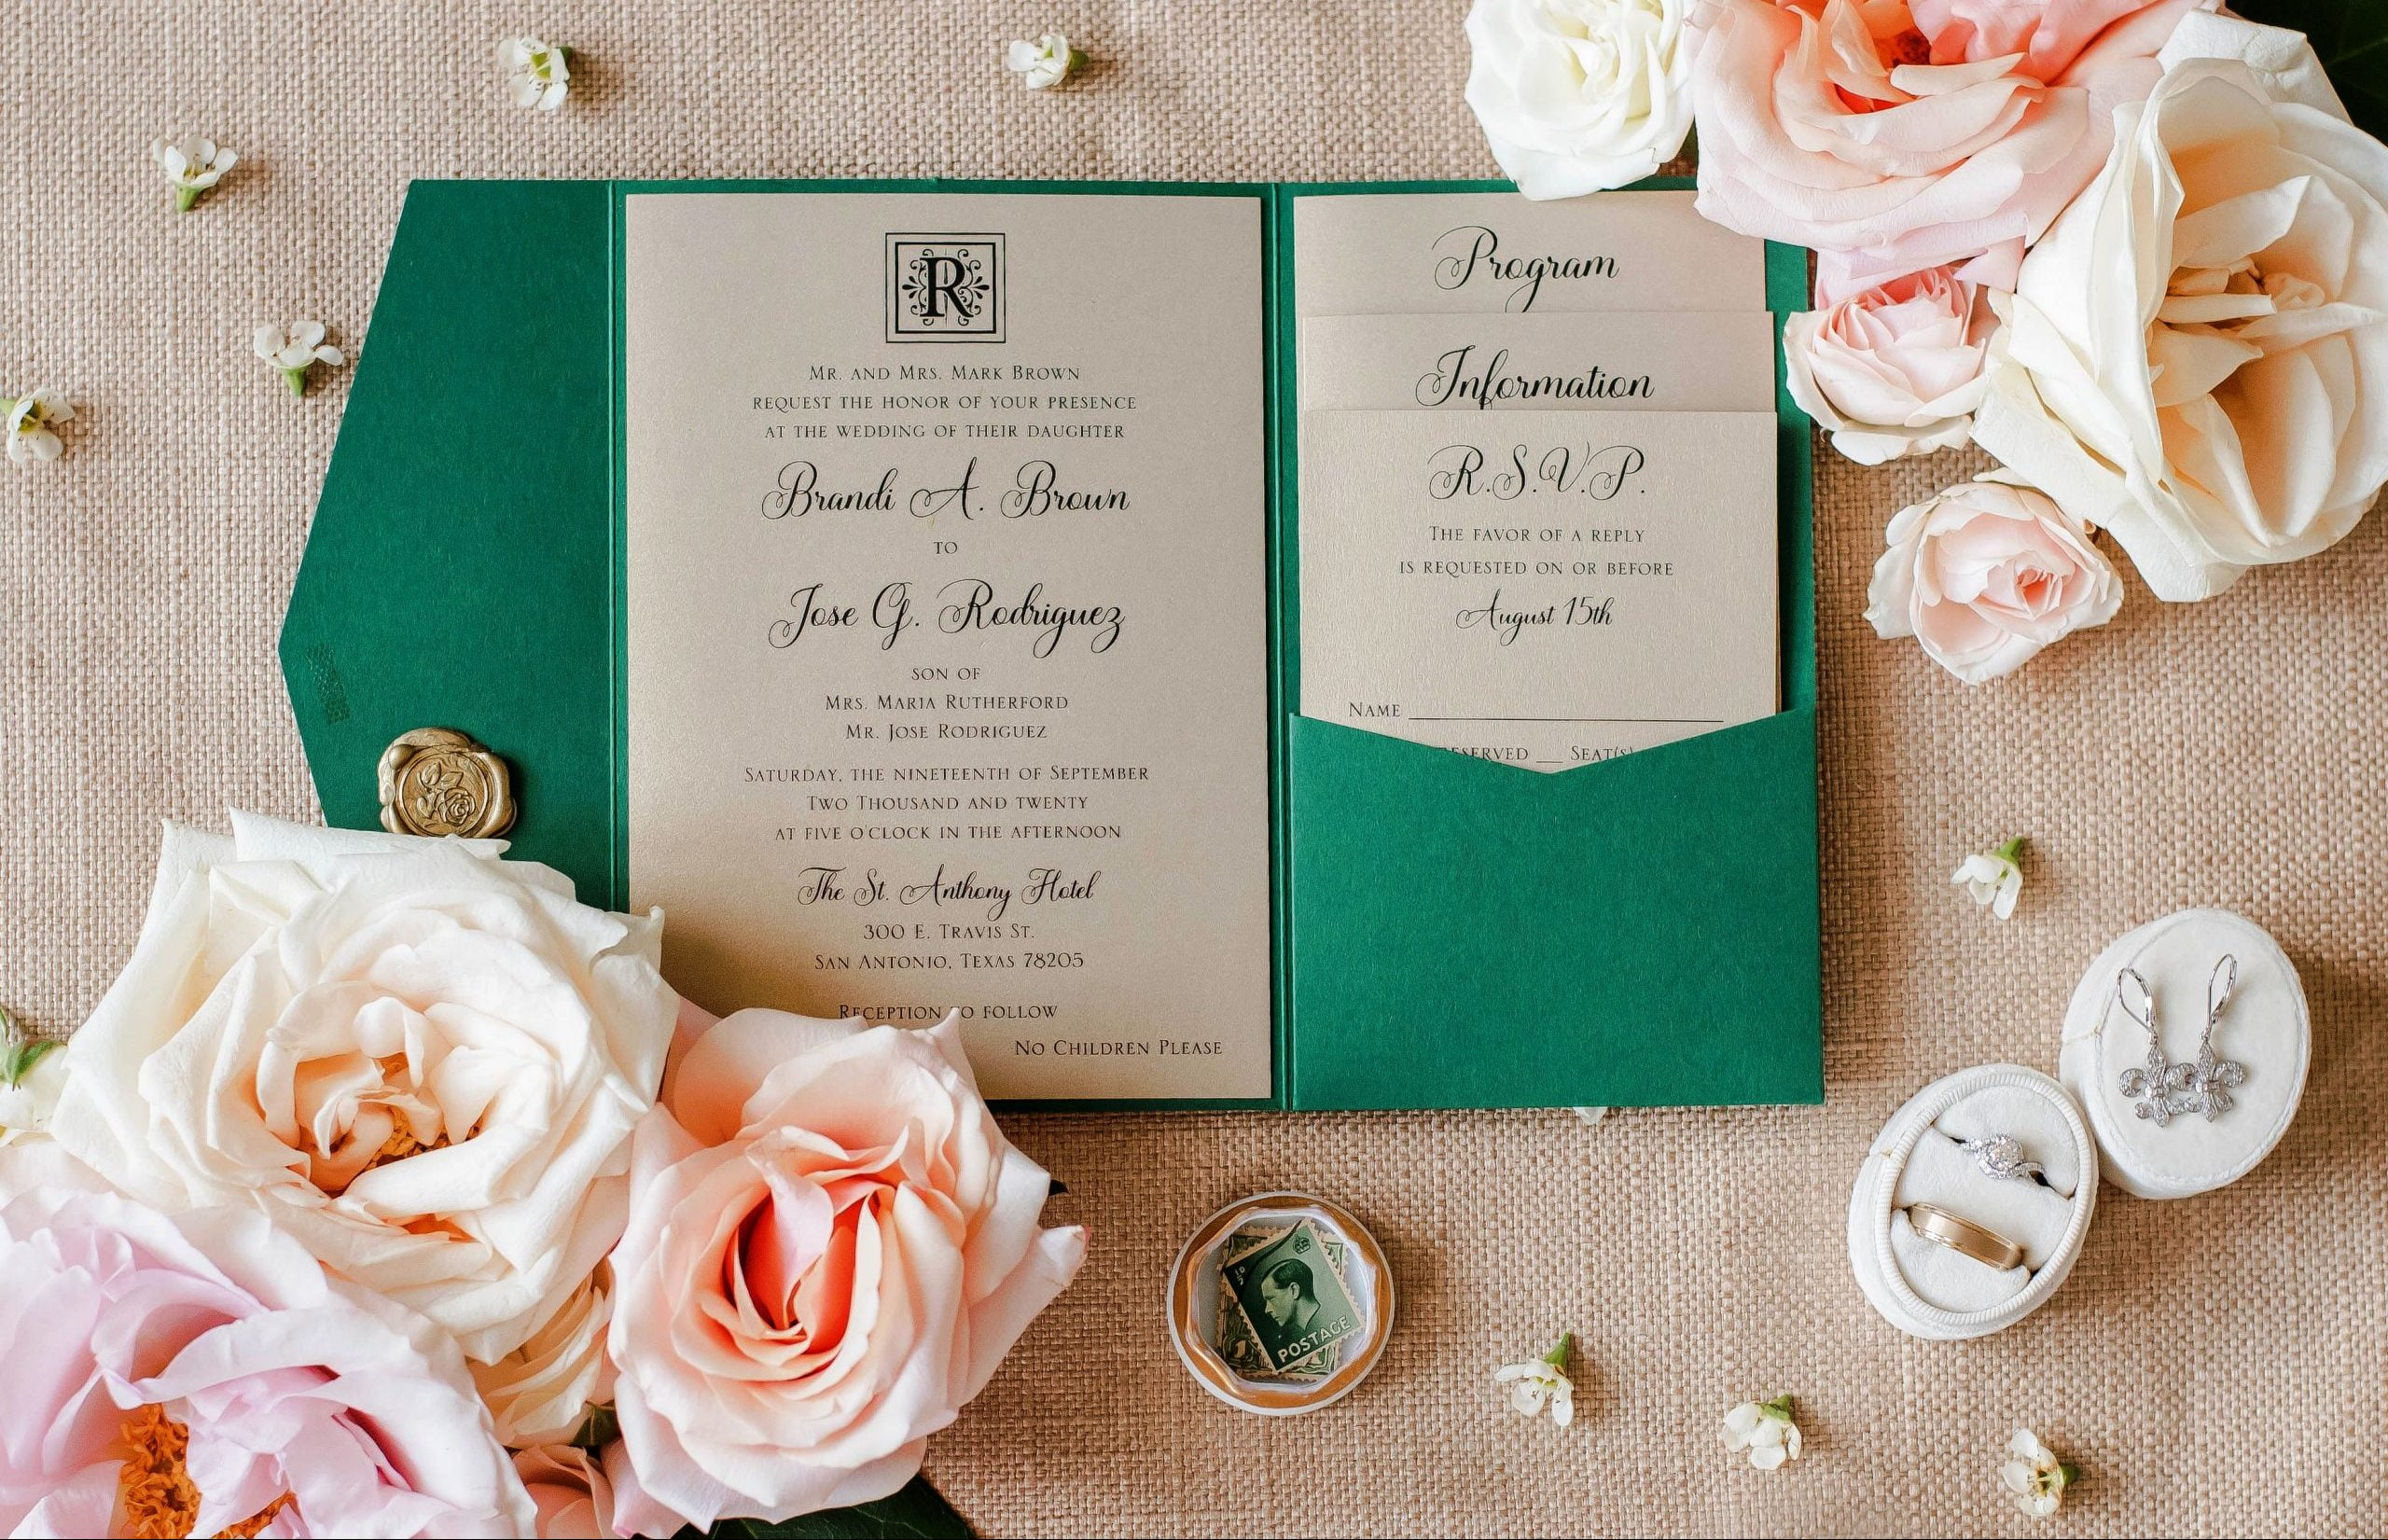 A green wedding invitation adorned with roses, perfect for a luxurious San Antonio wedding.